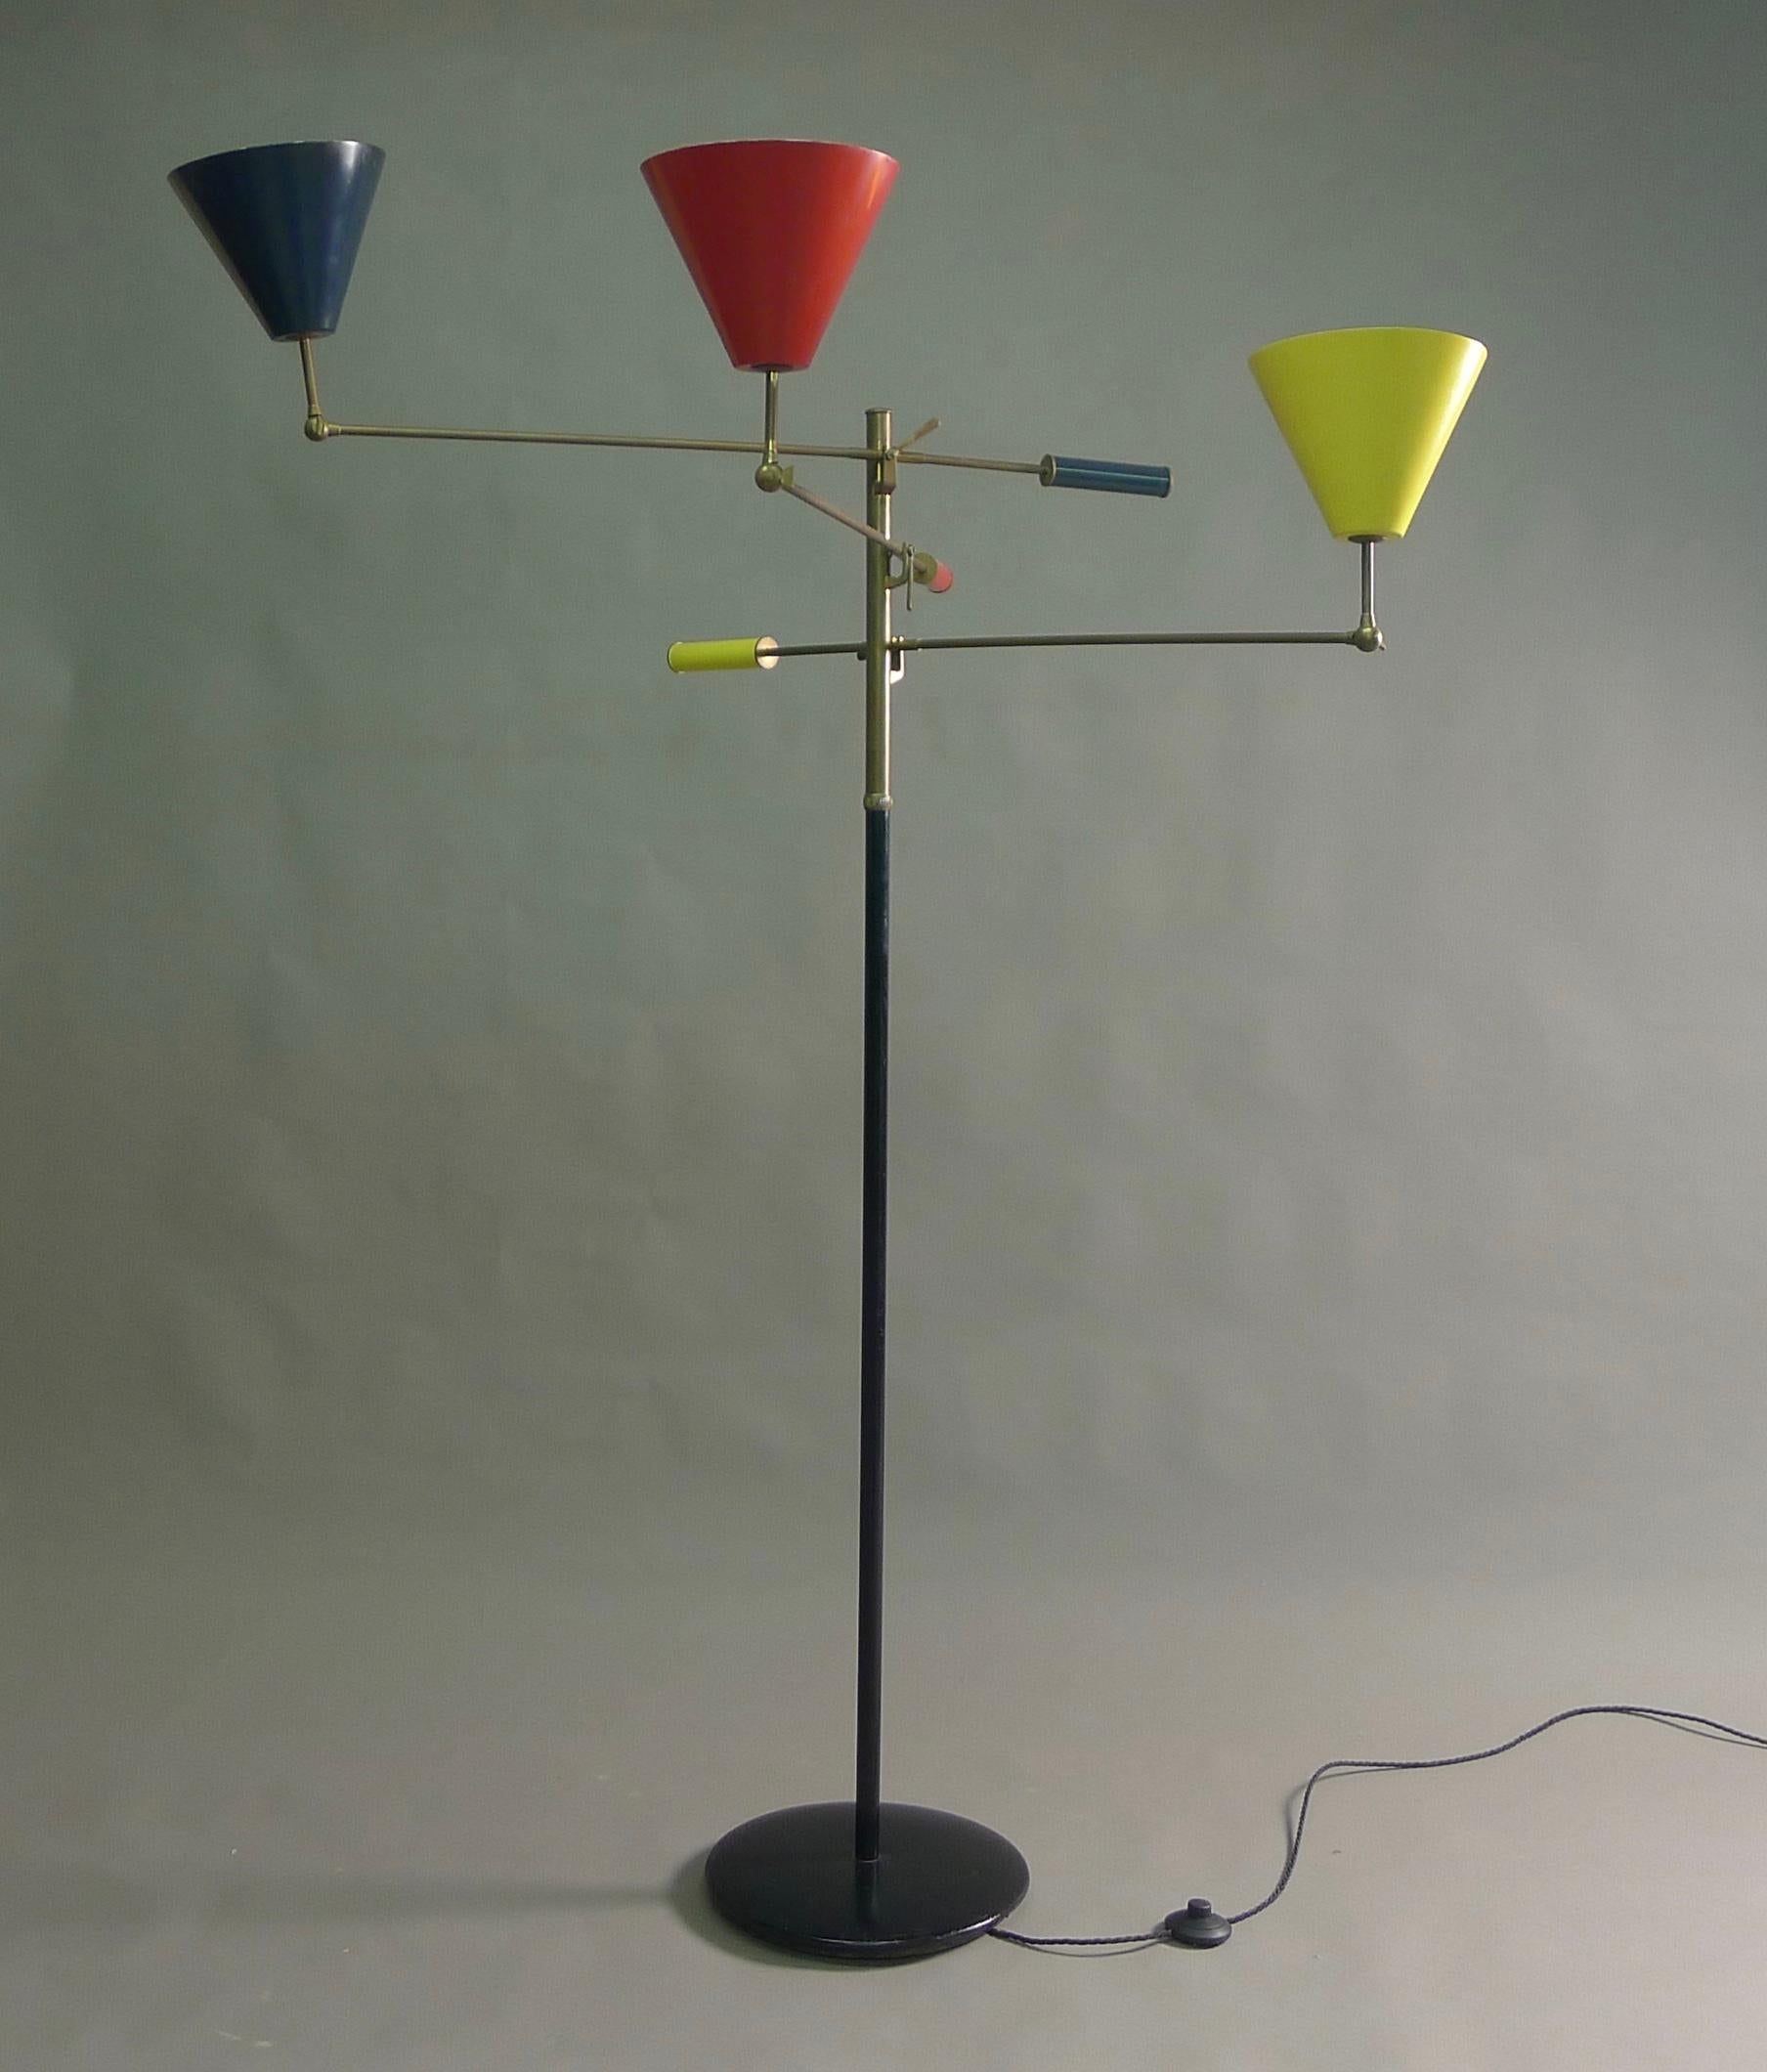 Angelo Lelii for his own company, Arredoluce, Monza, Italy. Circa 1950. This example of the iconic Triennale lamp is the very first version, it features a metal base lacquered black, the stem post is black below a brass collar, the upper brass part